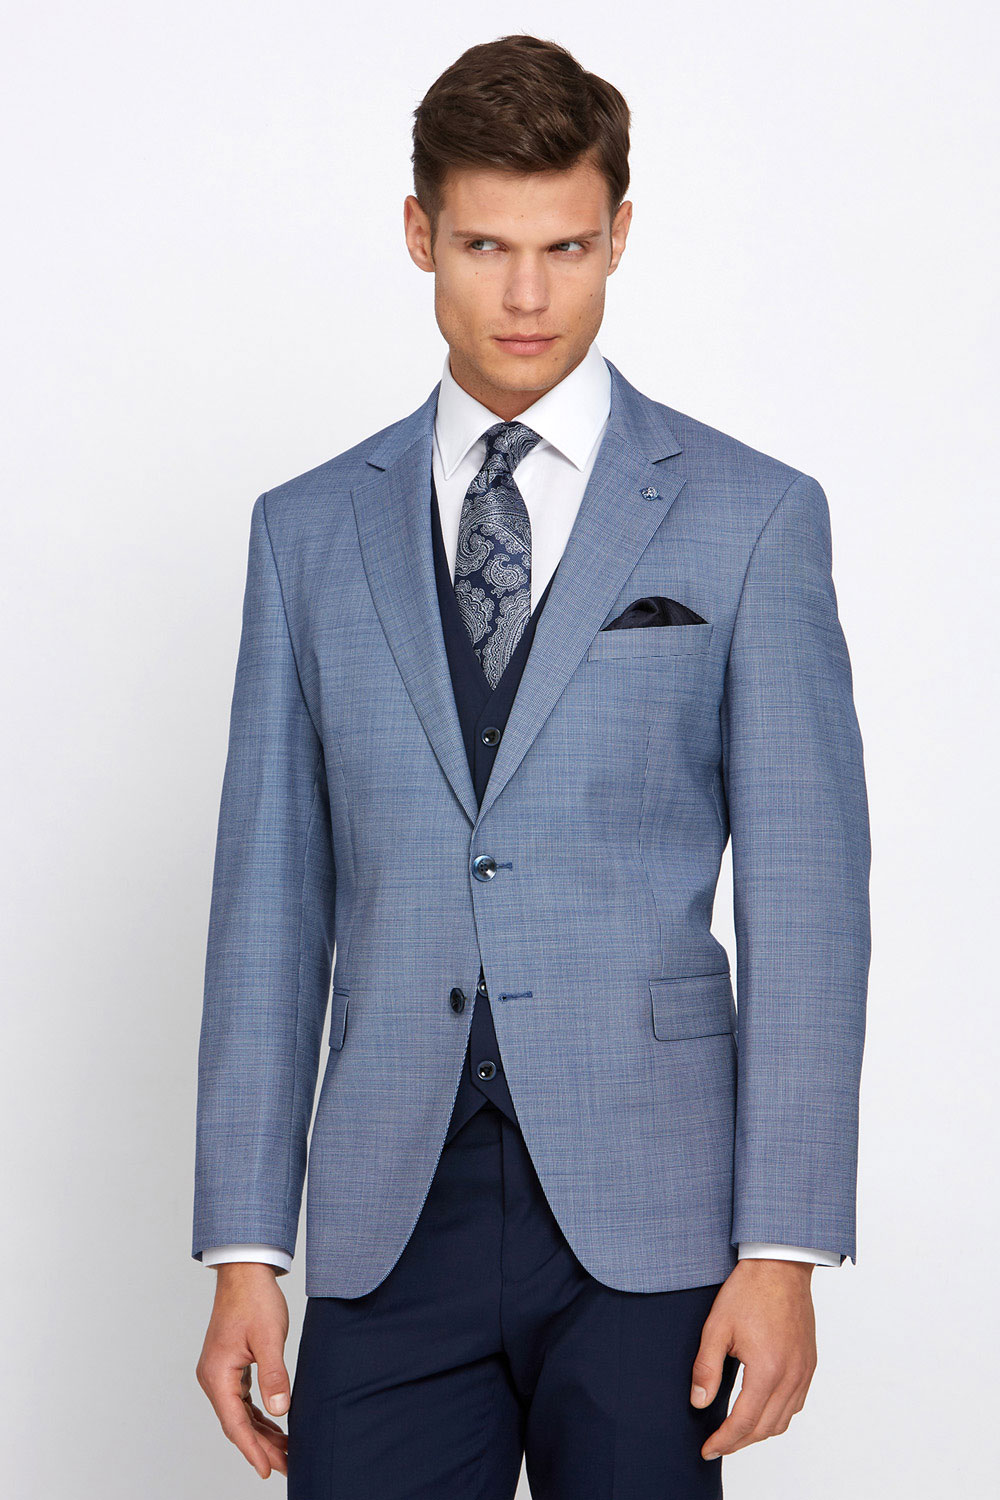 Bobby Jacket James Navy Suit - Tom Murphy's Formal and Menswear